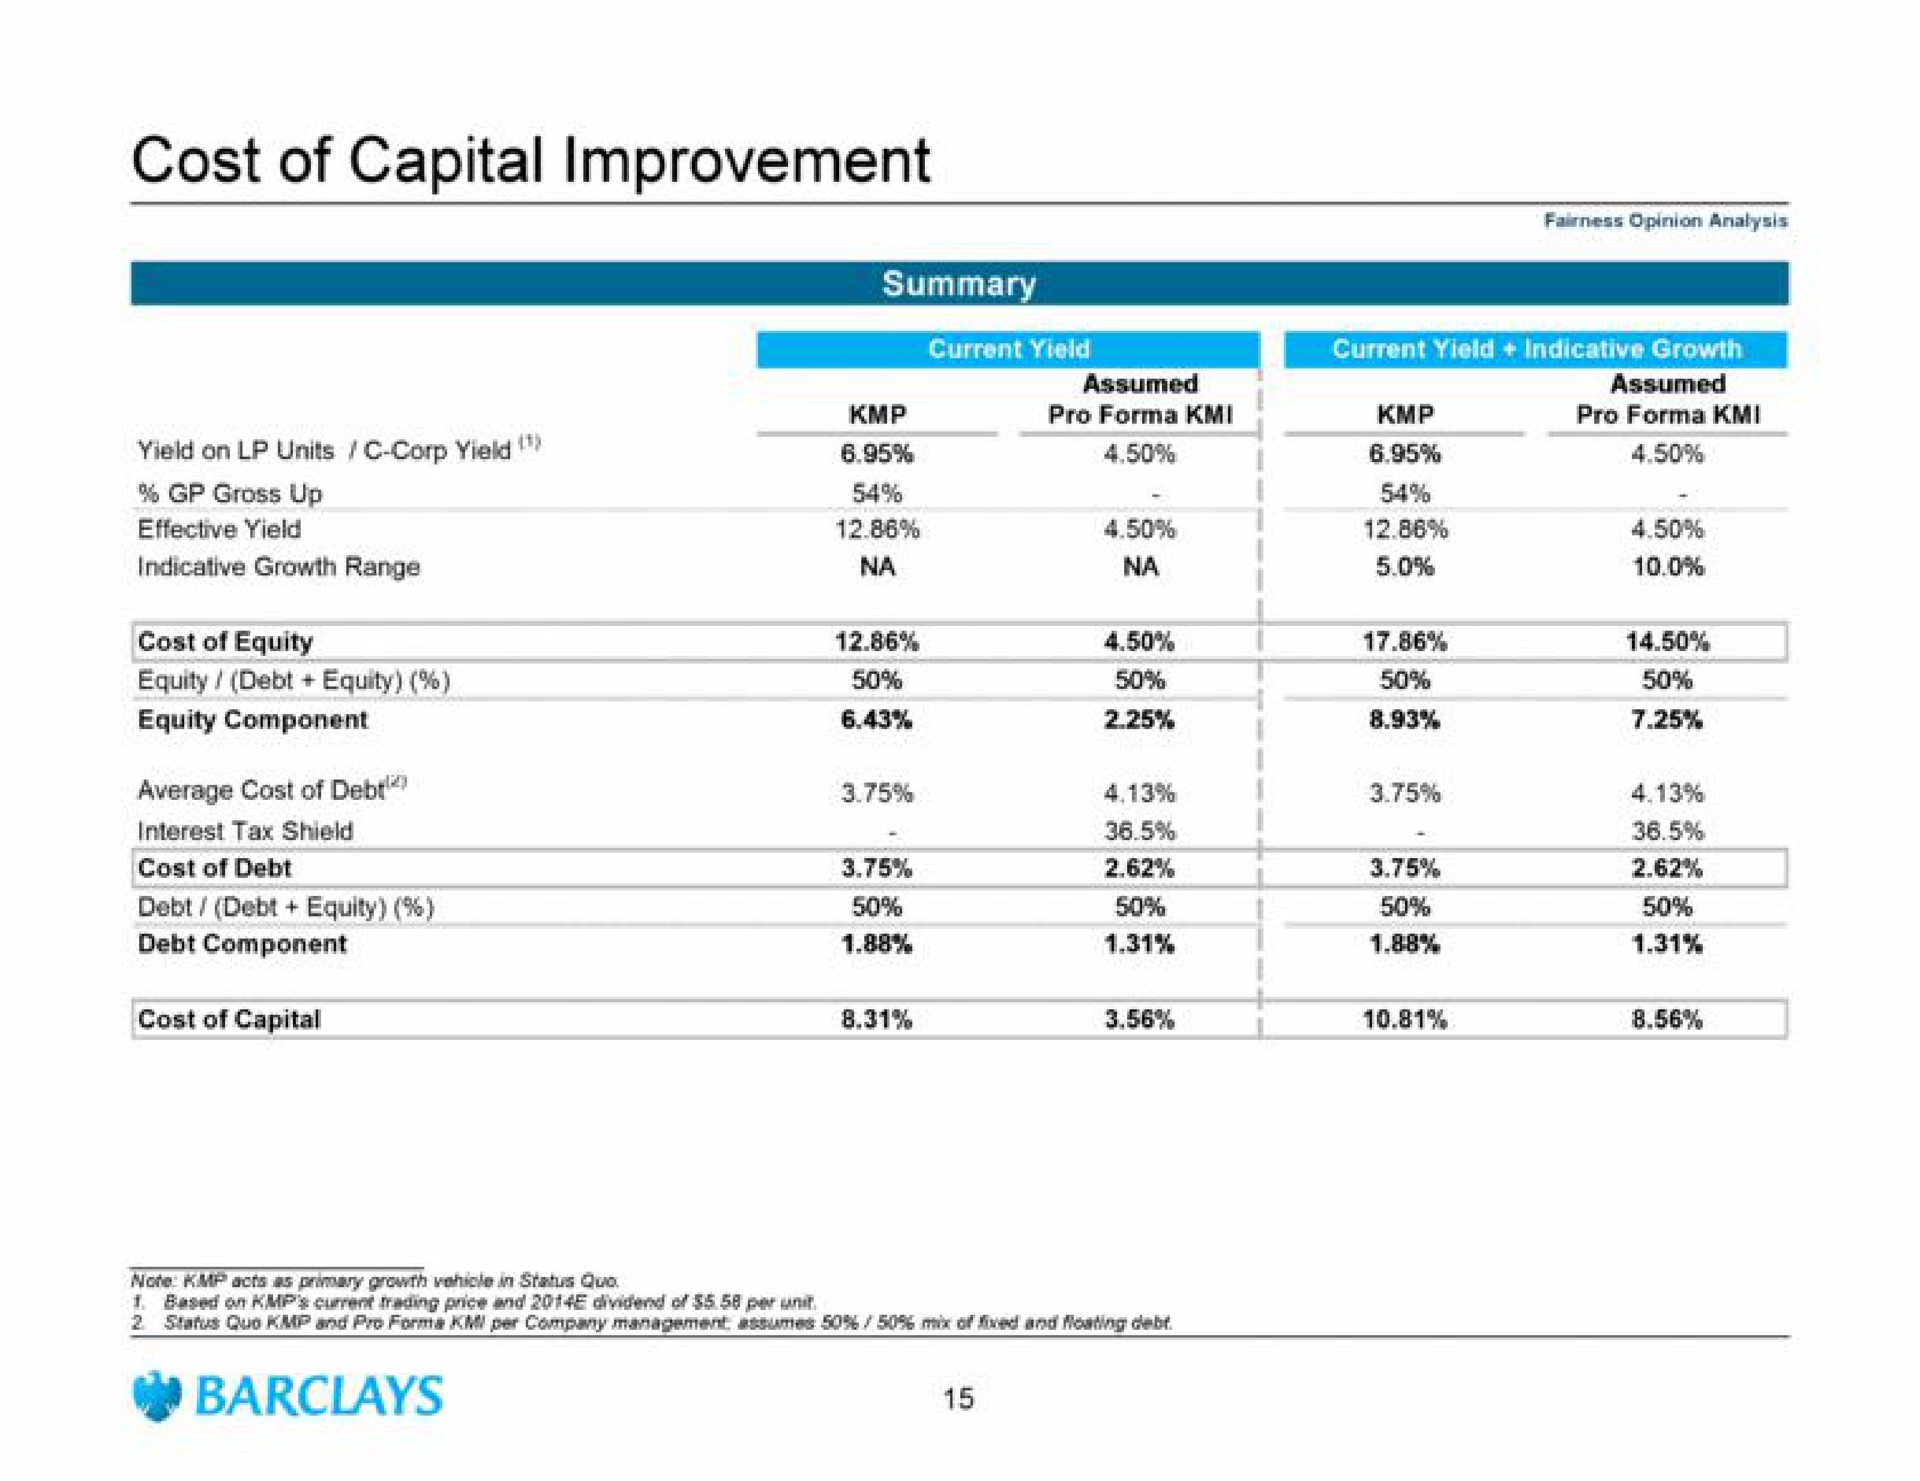 cost of capital improvement cost of equity equity debt equity at | Barclays